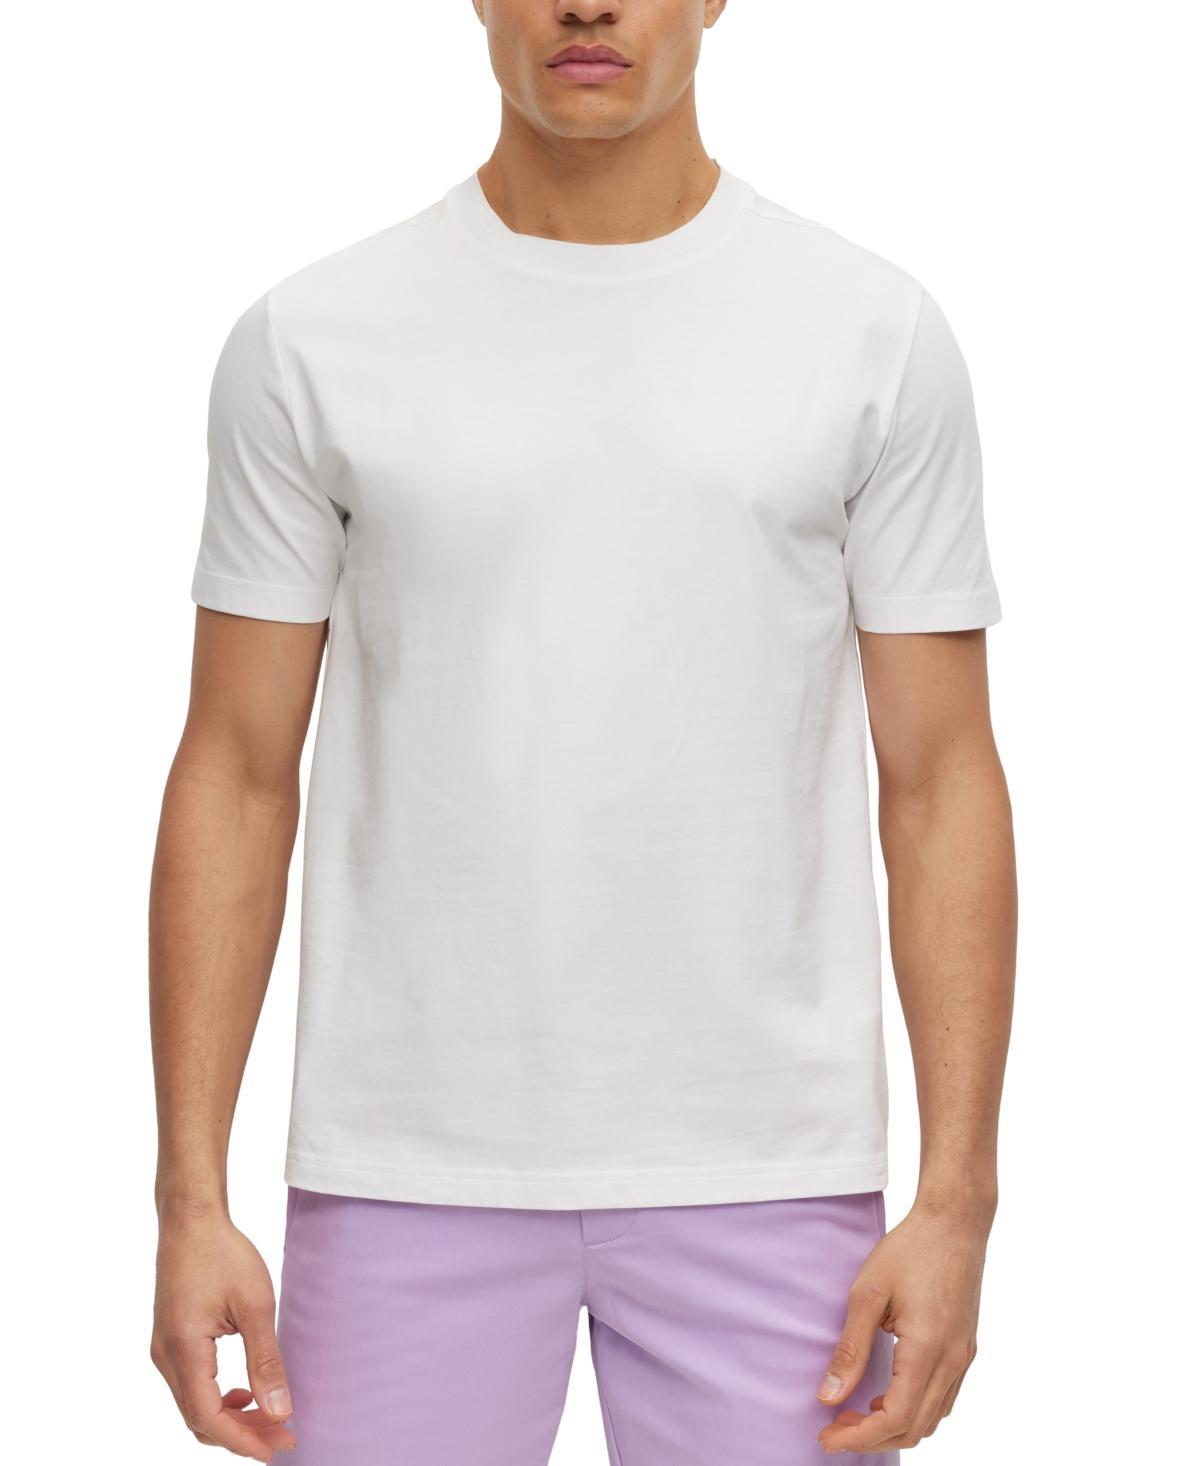 Mens Cotton-Jersey T-Shirt With Printed Logo Product Image